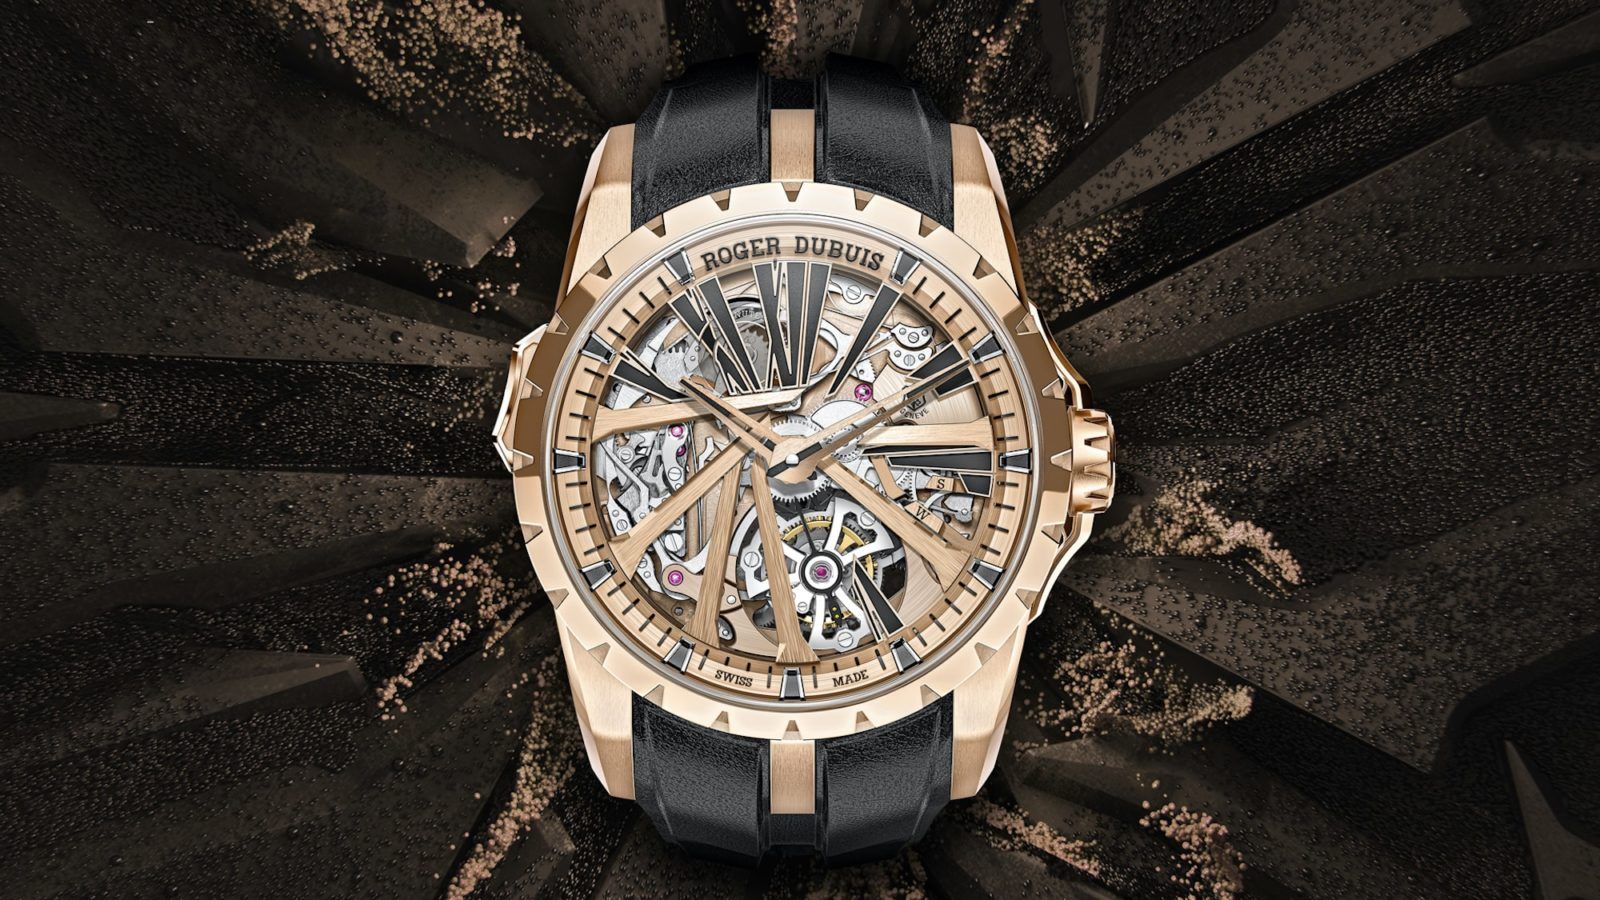 The pink gold Roger Dubuis Excalibur Diabolus in Machina is a bold master stroke in unconventional watchmaking